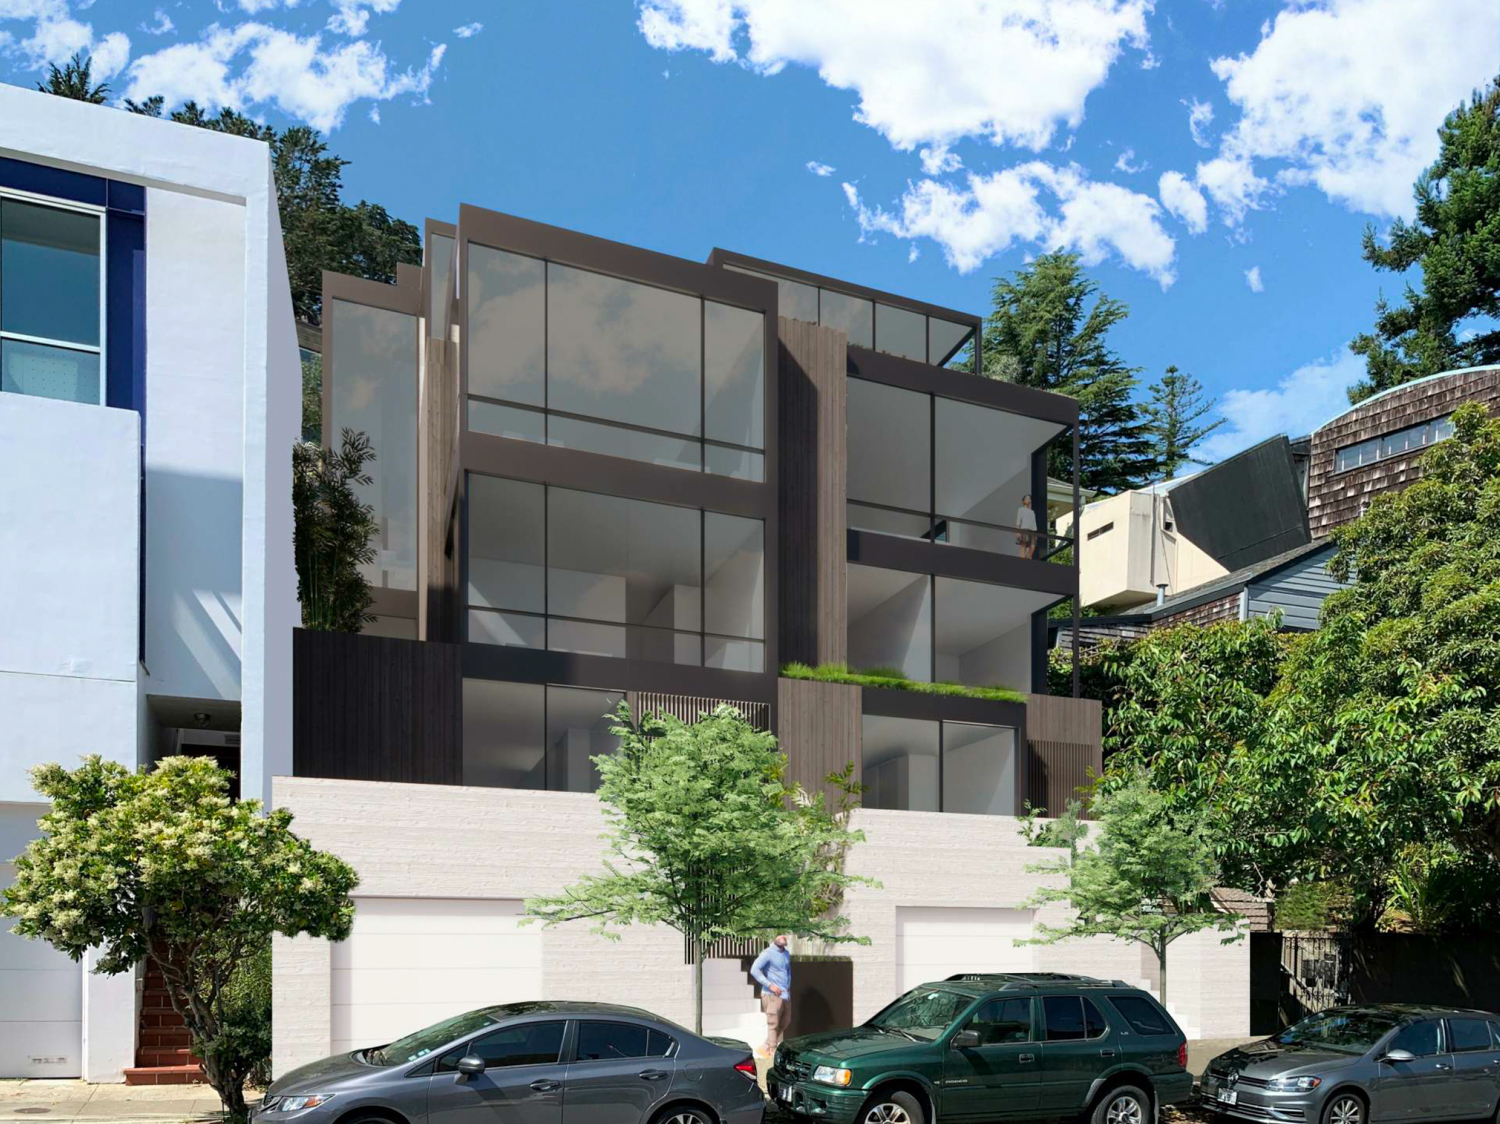 144 Laidley Street pedestrian view, rendering by EYRC Architects